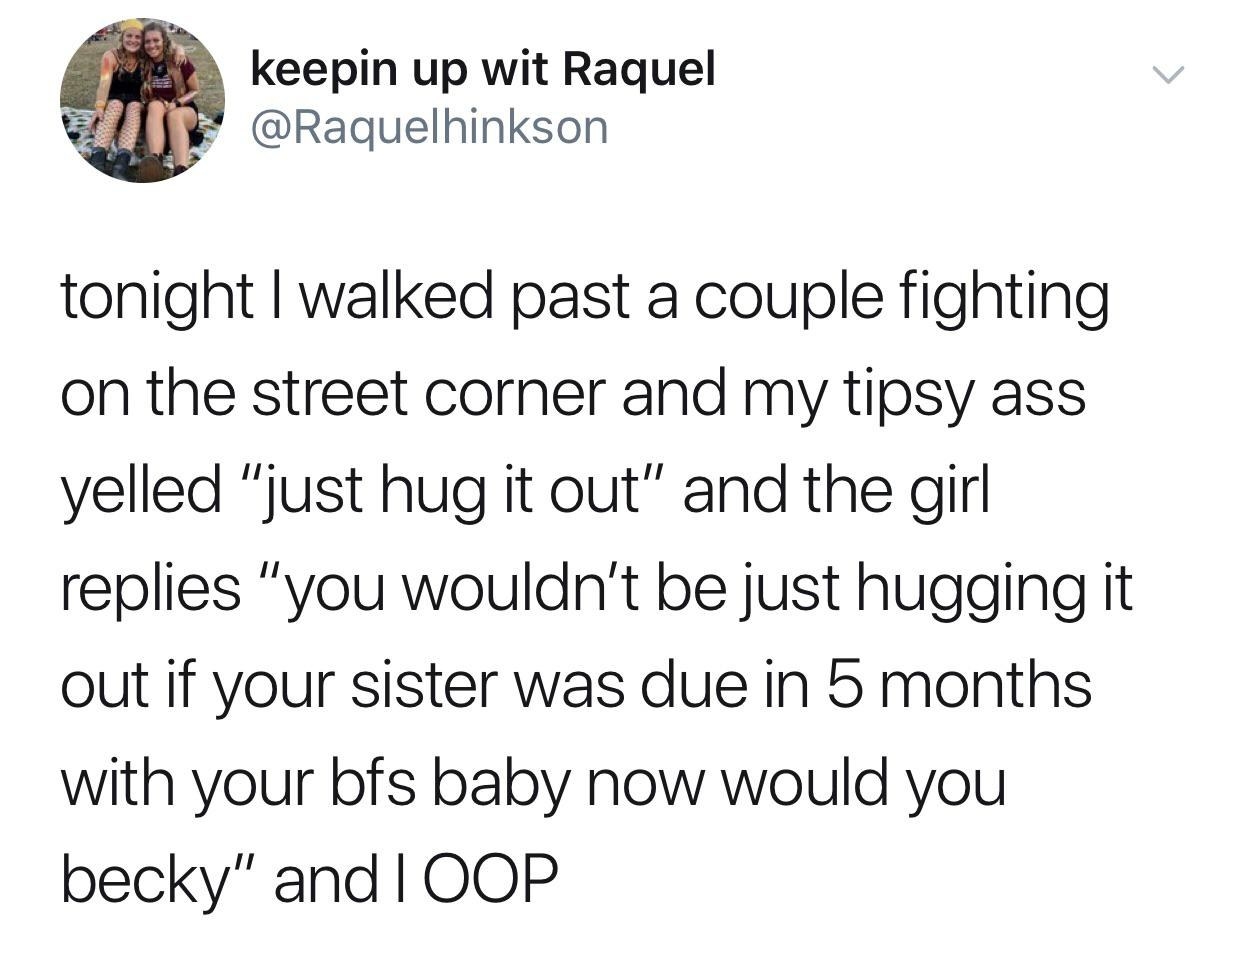 tweet reading tonight i walked past a couple fighting on a street corner and my tipsy ass yelled just hug it out and the girl replied you wouldnt if your sister was due with your bf&#x27;s baby